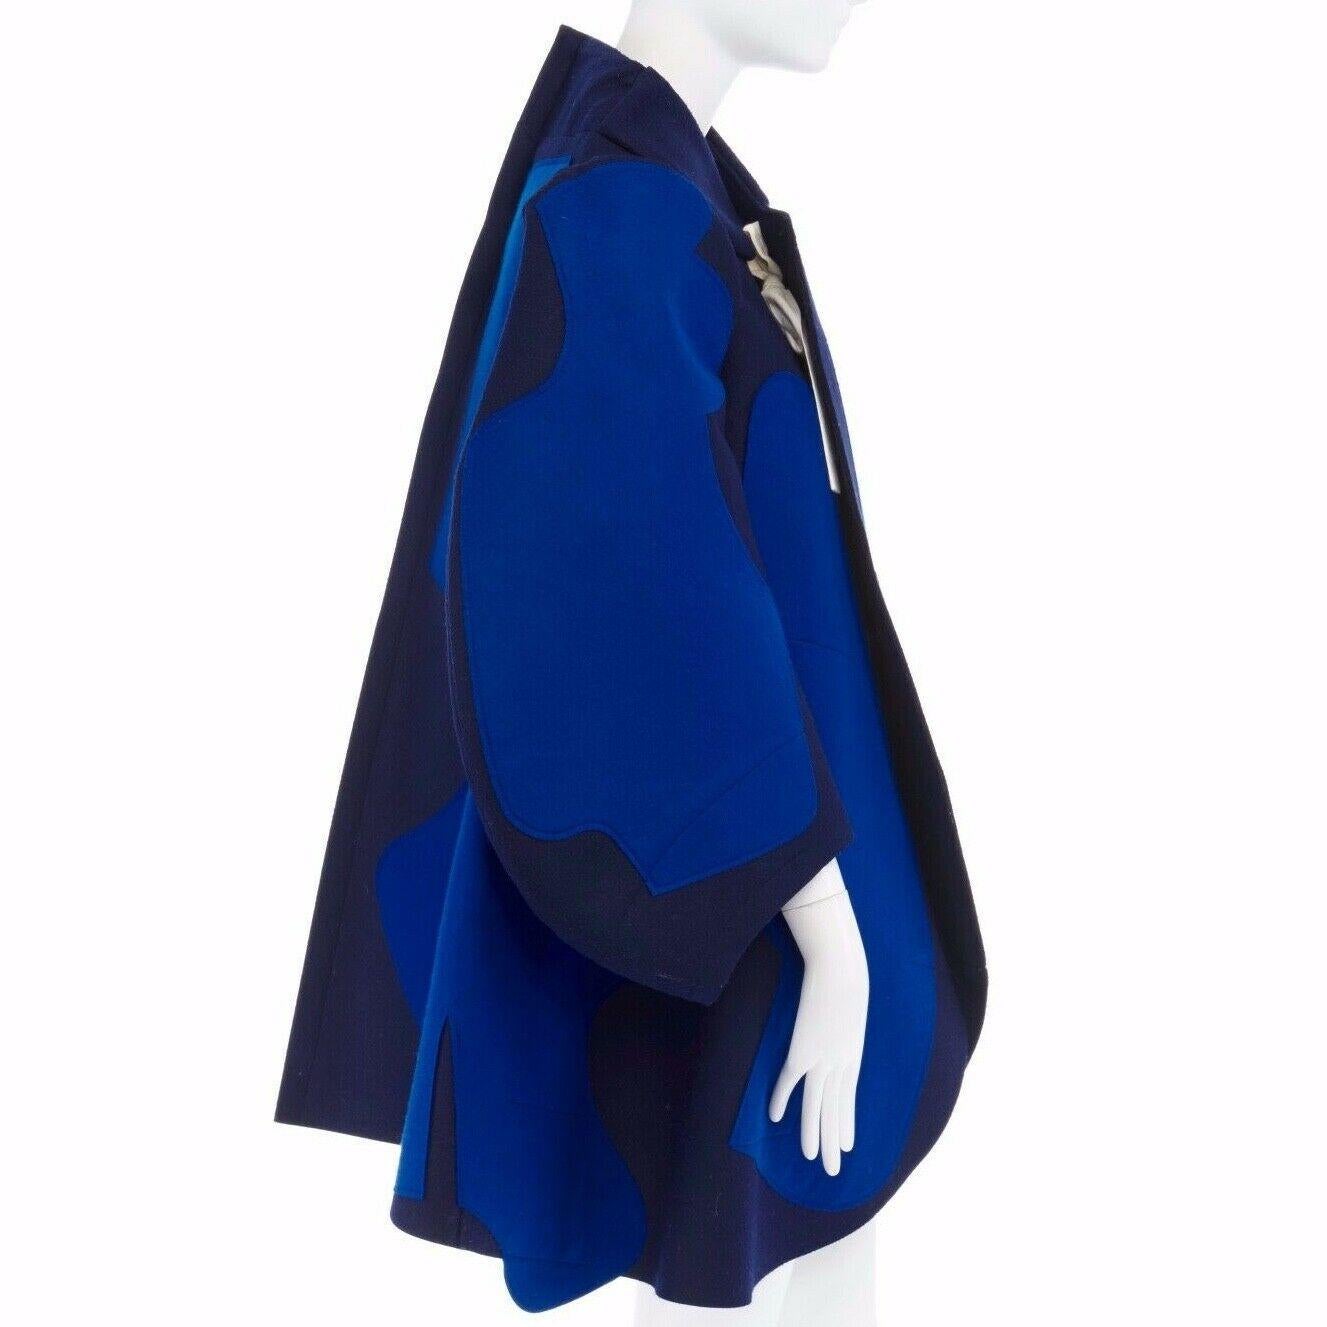 Women's new COMME DES GARCONS AD2012 flatpacked 2D blue abstract shape wool felt coat XS